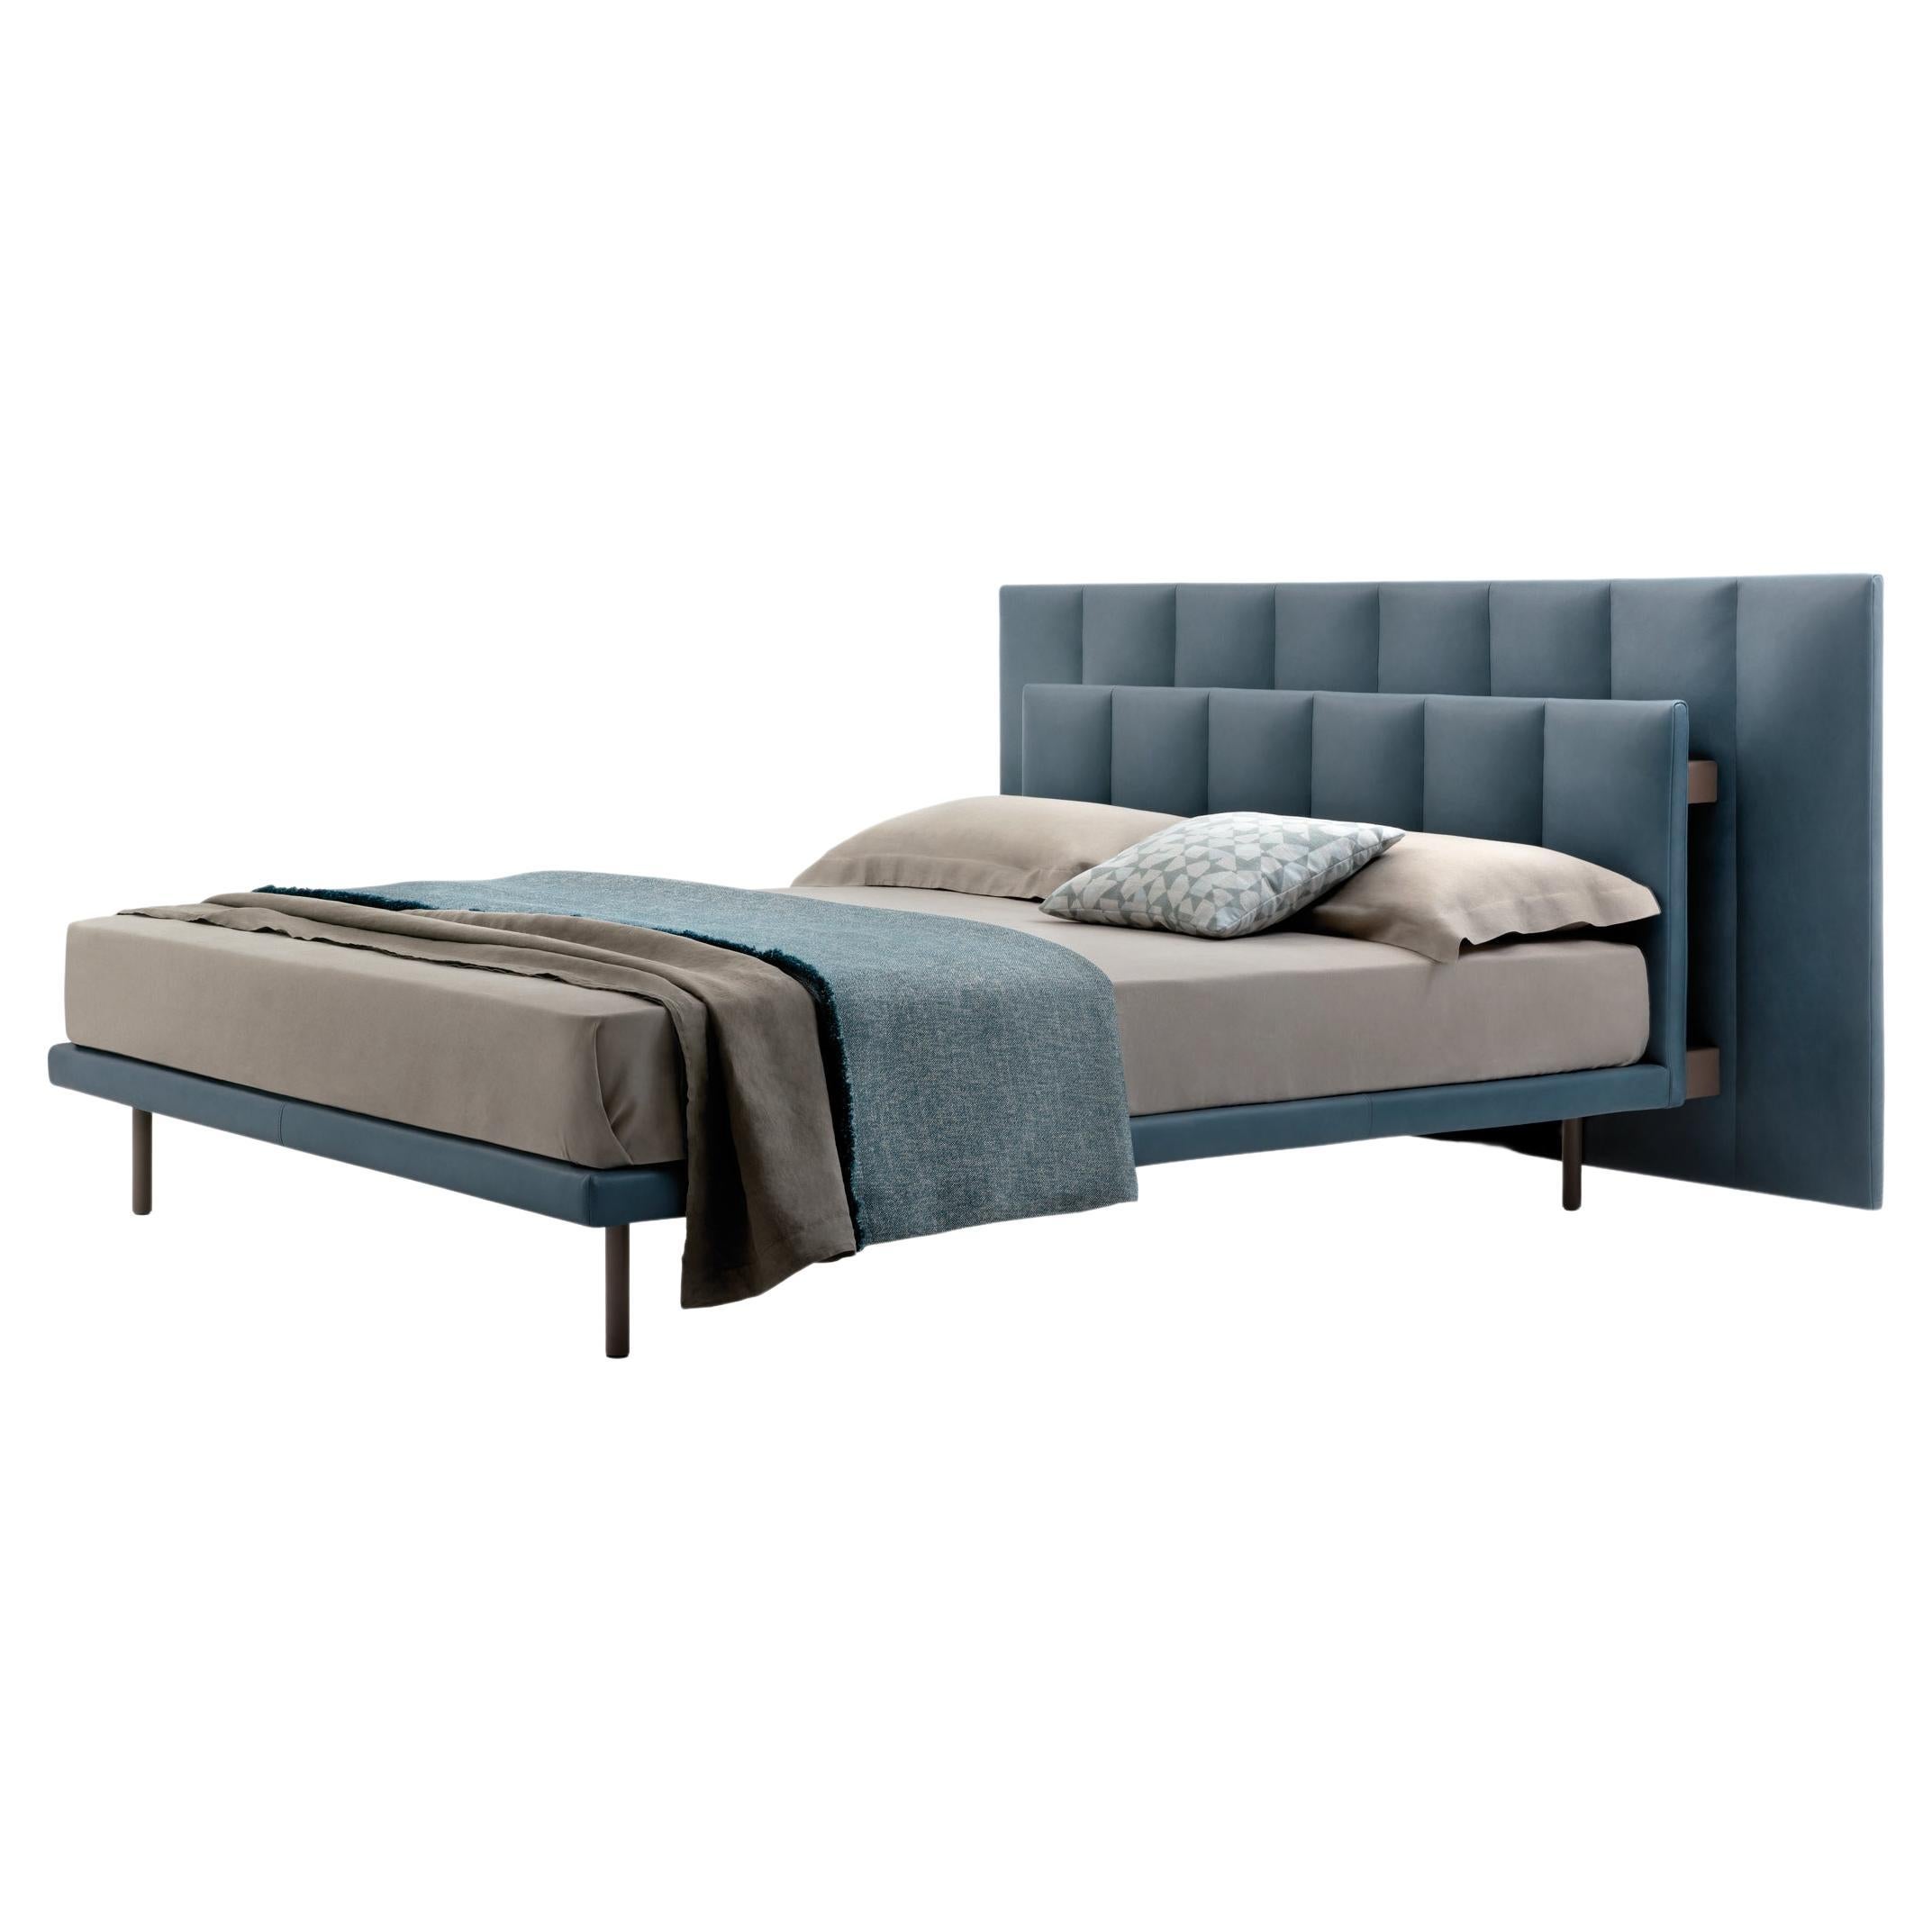 Zanotta Large Grangala Bed with Single Springingin in Grey Upholstery For Sale